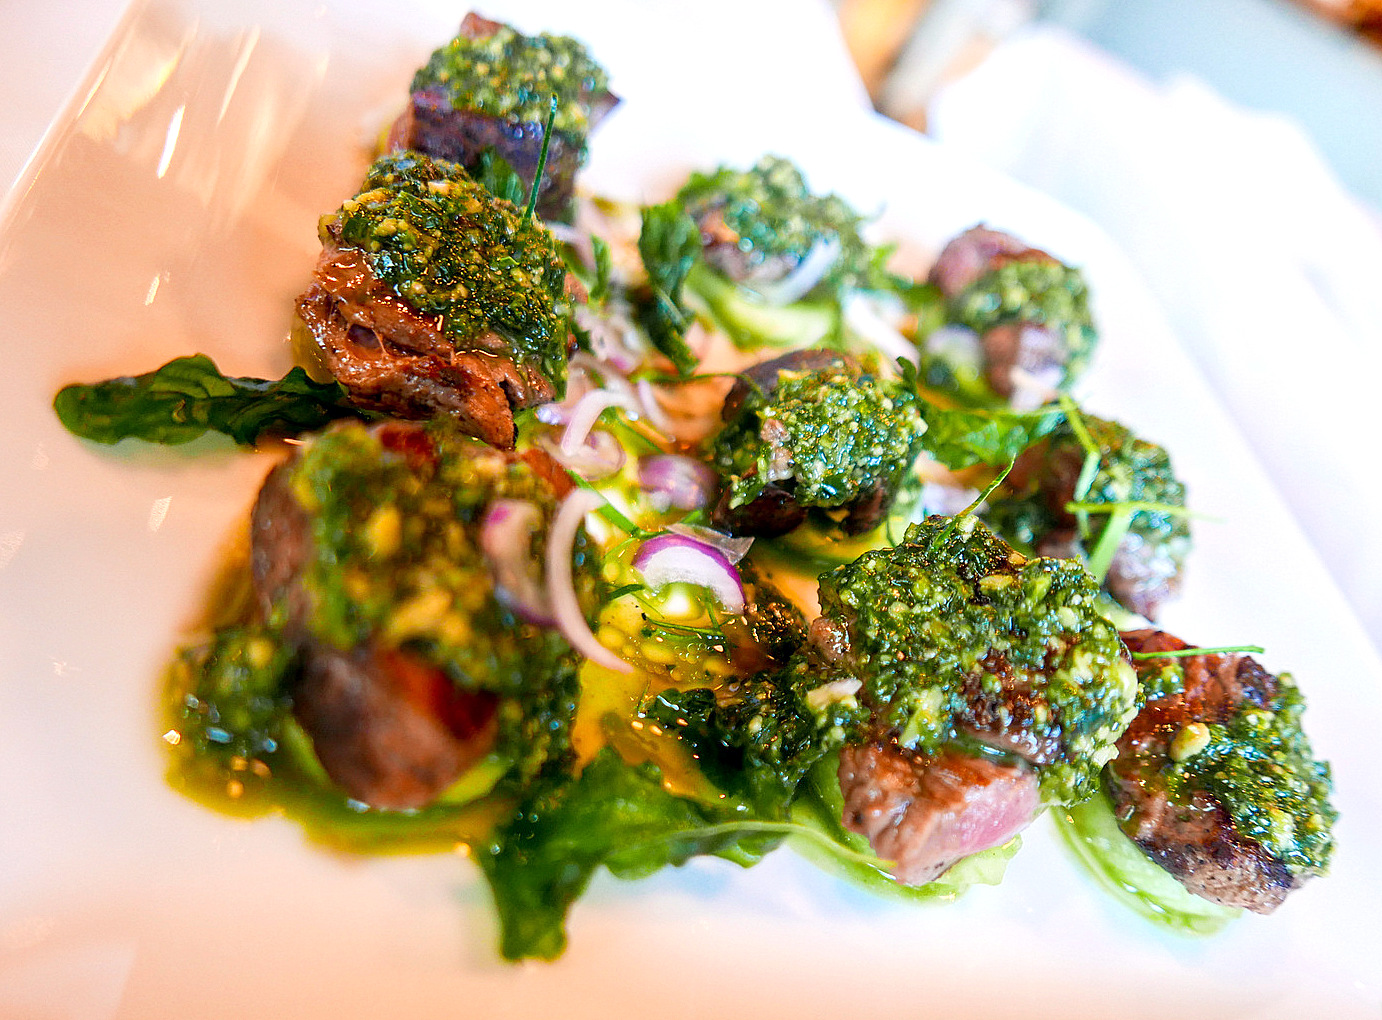 10. Weeping Tiger (beef steak) with spicy pesto